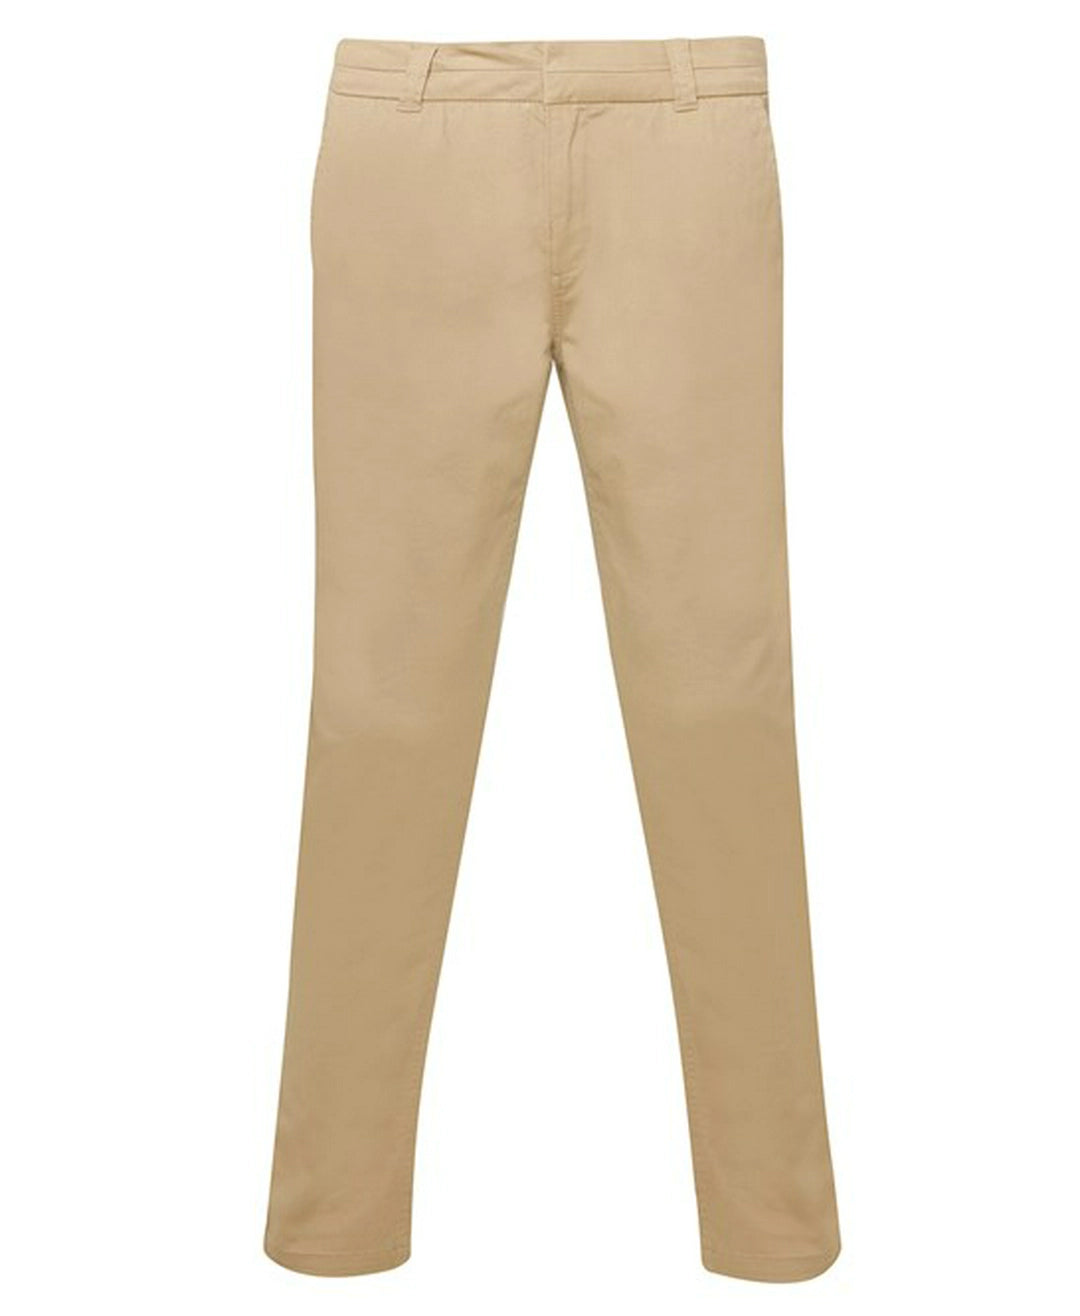 Asquith & Fox AQ060 Ladies Classic Fit Chinos - COOZO